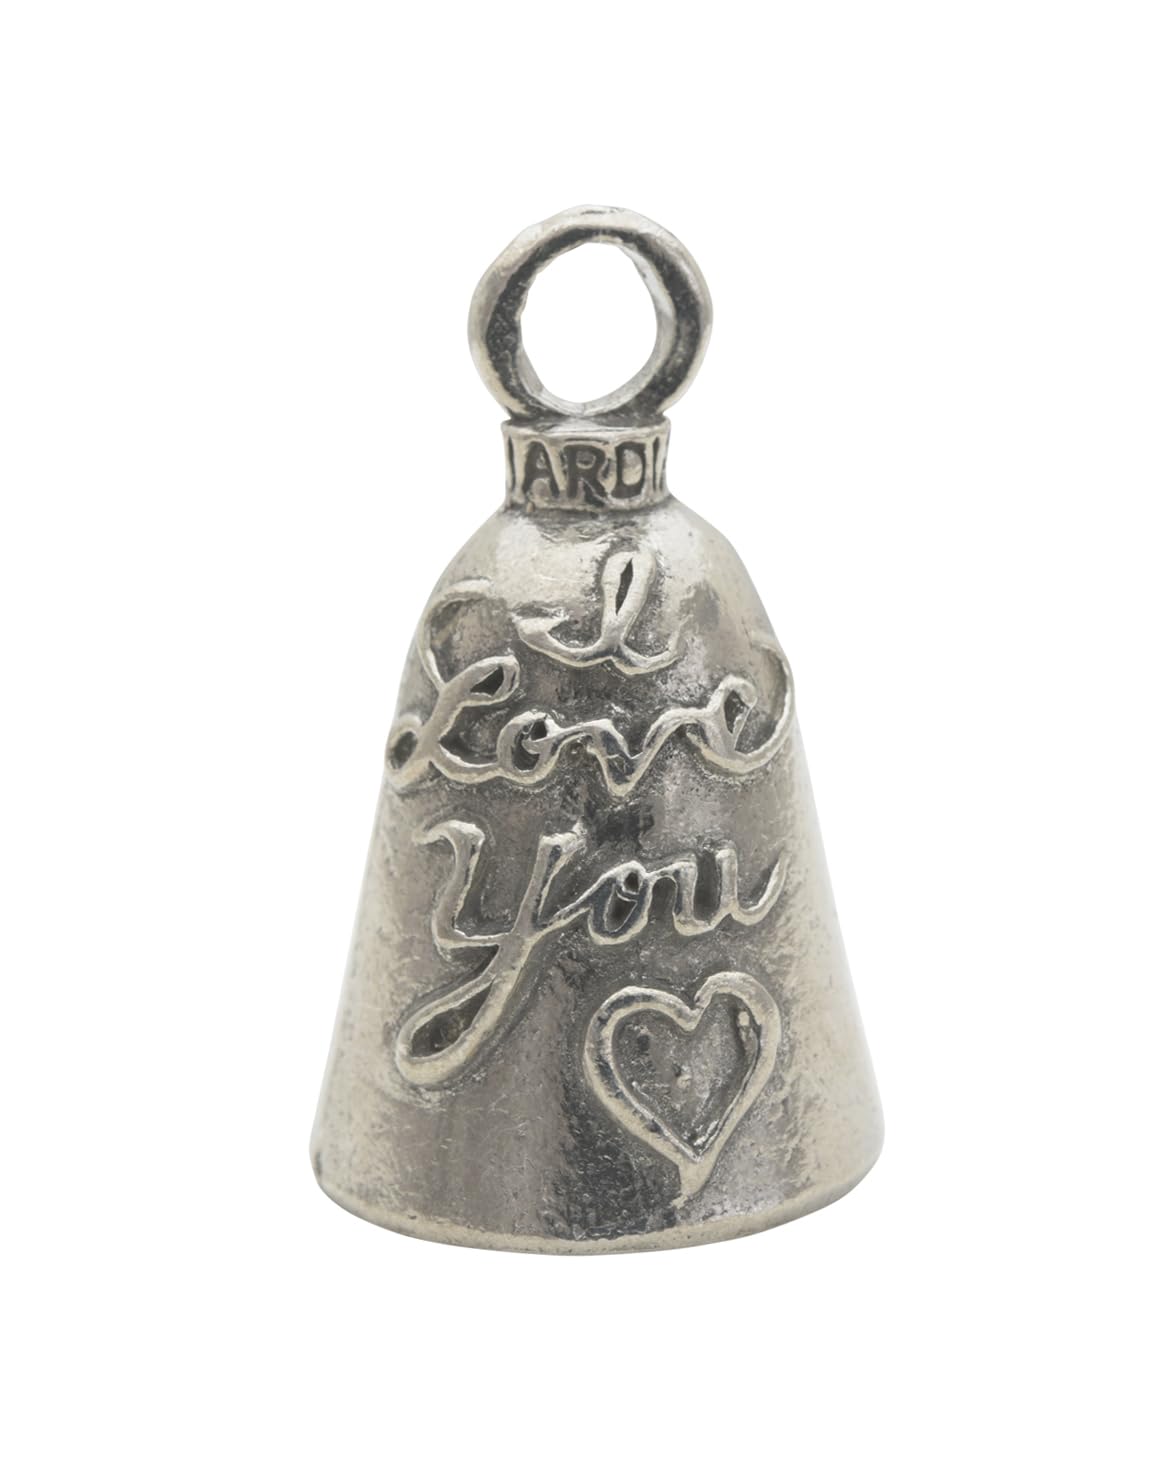 Guardian Bell I Love You Good Luck Bell w/Keyring & Black Velvet Gift Bag | Motorcycle Bell | Lead-Free Pewter | Good Luck Gift to Friends & Family | Bike Bell | Made in USA, silber, 4 cm von Guardian Bell